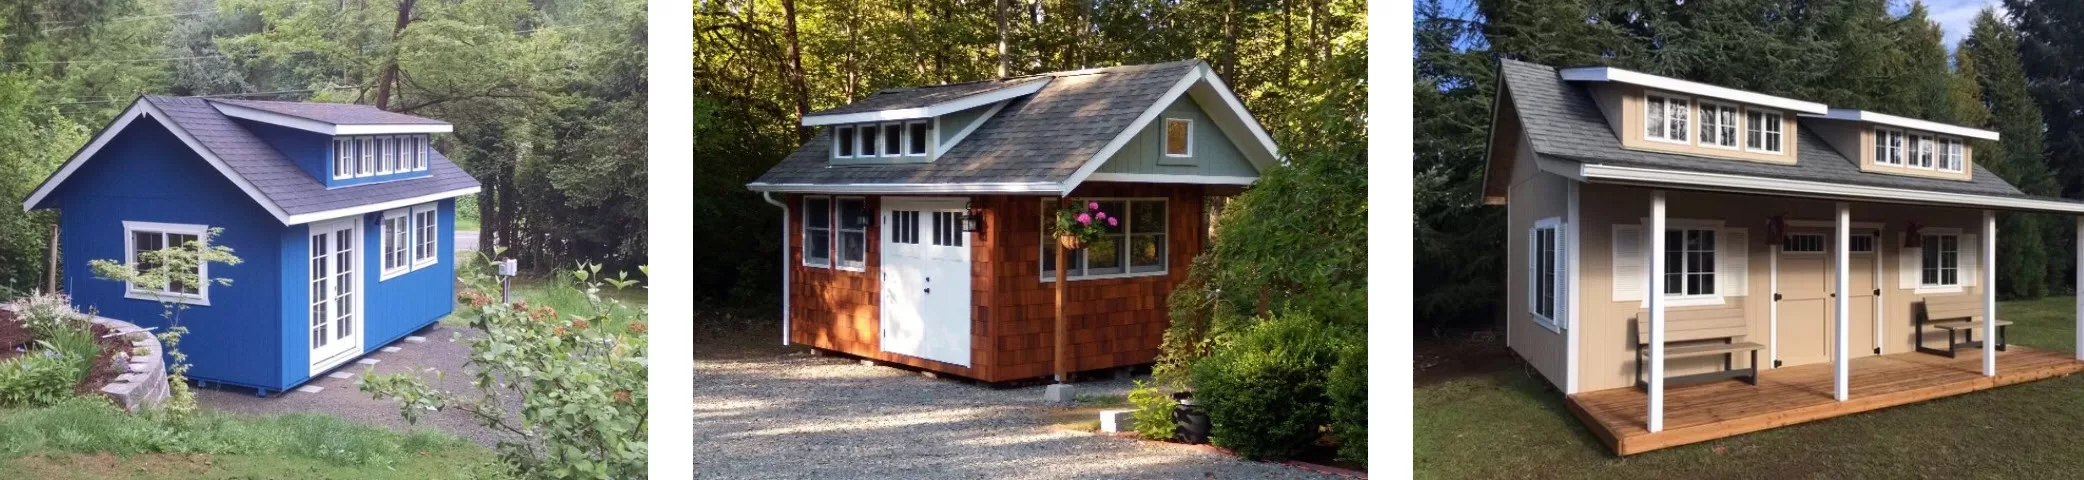 Building a Custom Storage Shed Is More Affordable Than You Might Think. Get an instant quote from Built Barns, Inc.'s 3D Shed Builder. https://www.betterbuiltbarns.com If you’ve been thinking about adding a shed to your property, now is a great time to do it. Thanks to recent advances in technology and manufacturing, sheds are more affordable than ever before. 100% financing is available on all of our sheds for sale, garden sheds, storage sheds, art sheds, bike sheds, tool sheds, and more. Start shopping for sheds today! Have more questions? Call us at 1-800-941-2417 to learn more about our current selection and take advantage of our special offers.